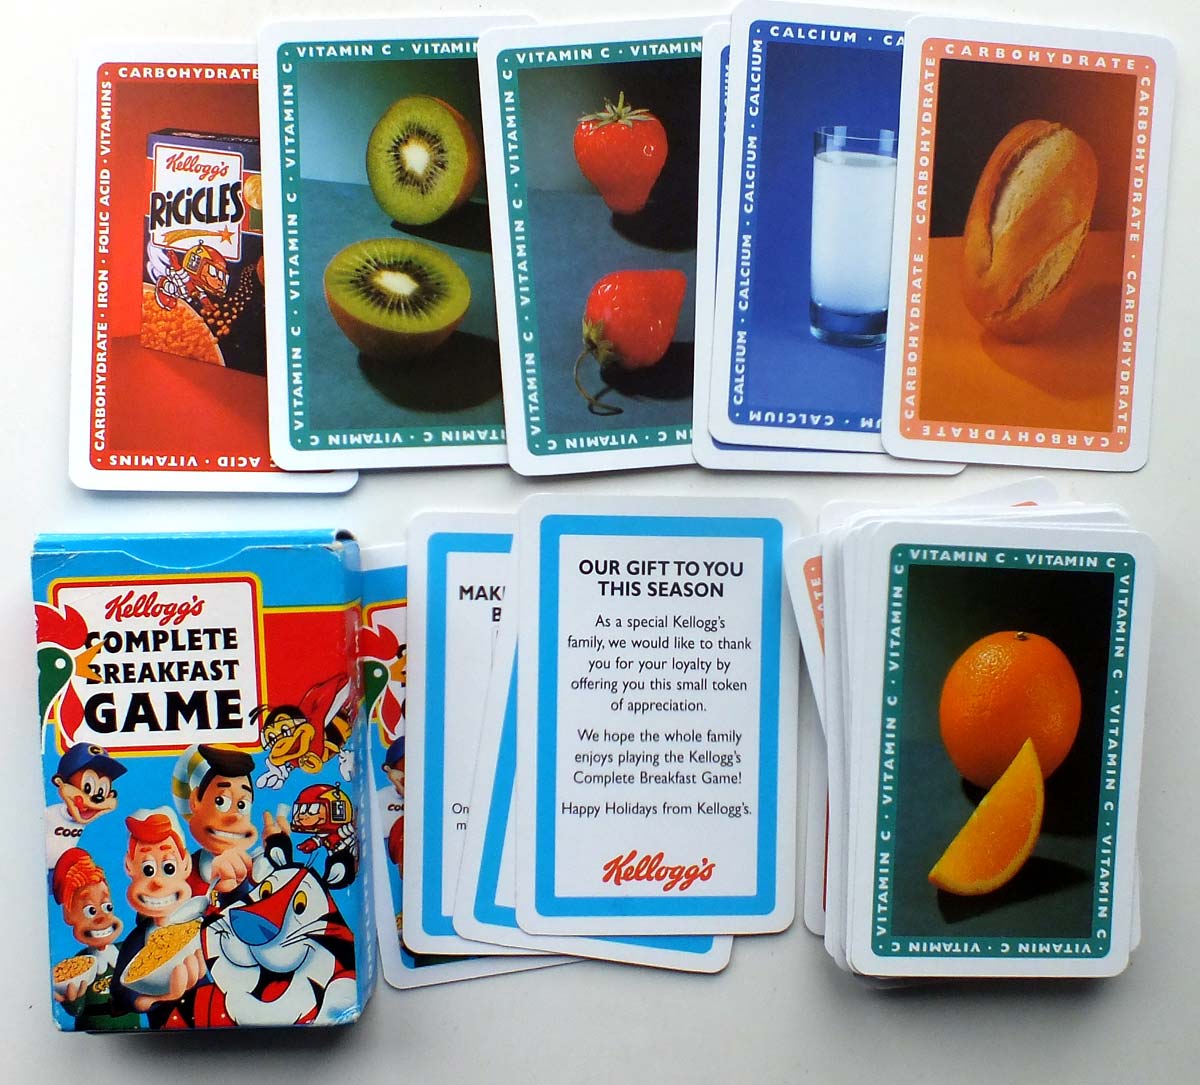 Kellogg’s Complete Breakfast card game, ©1997